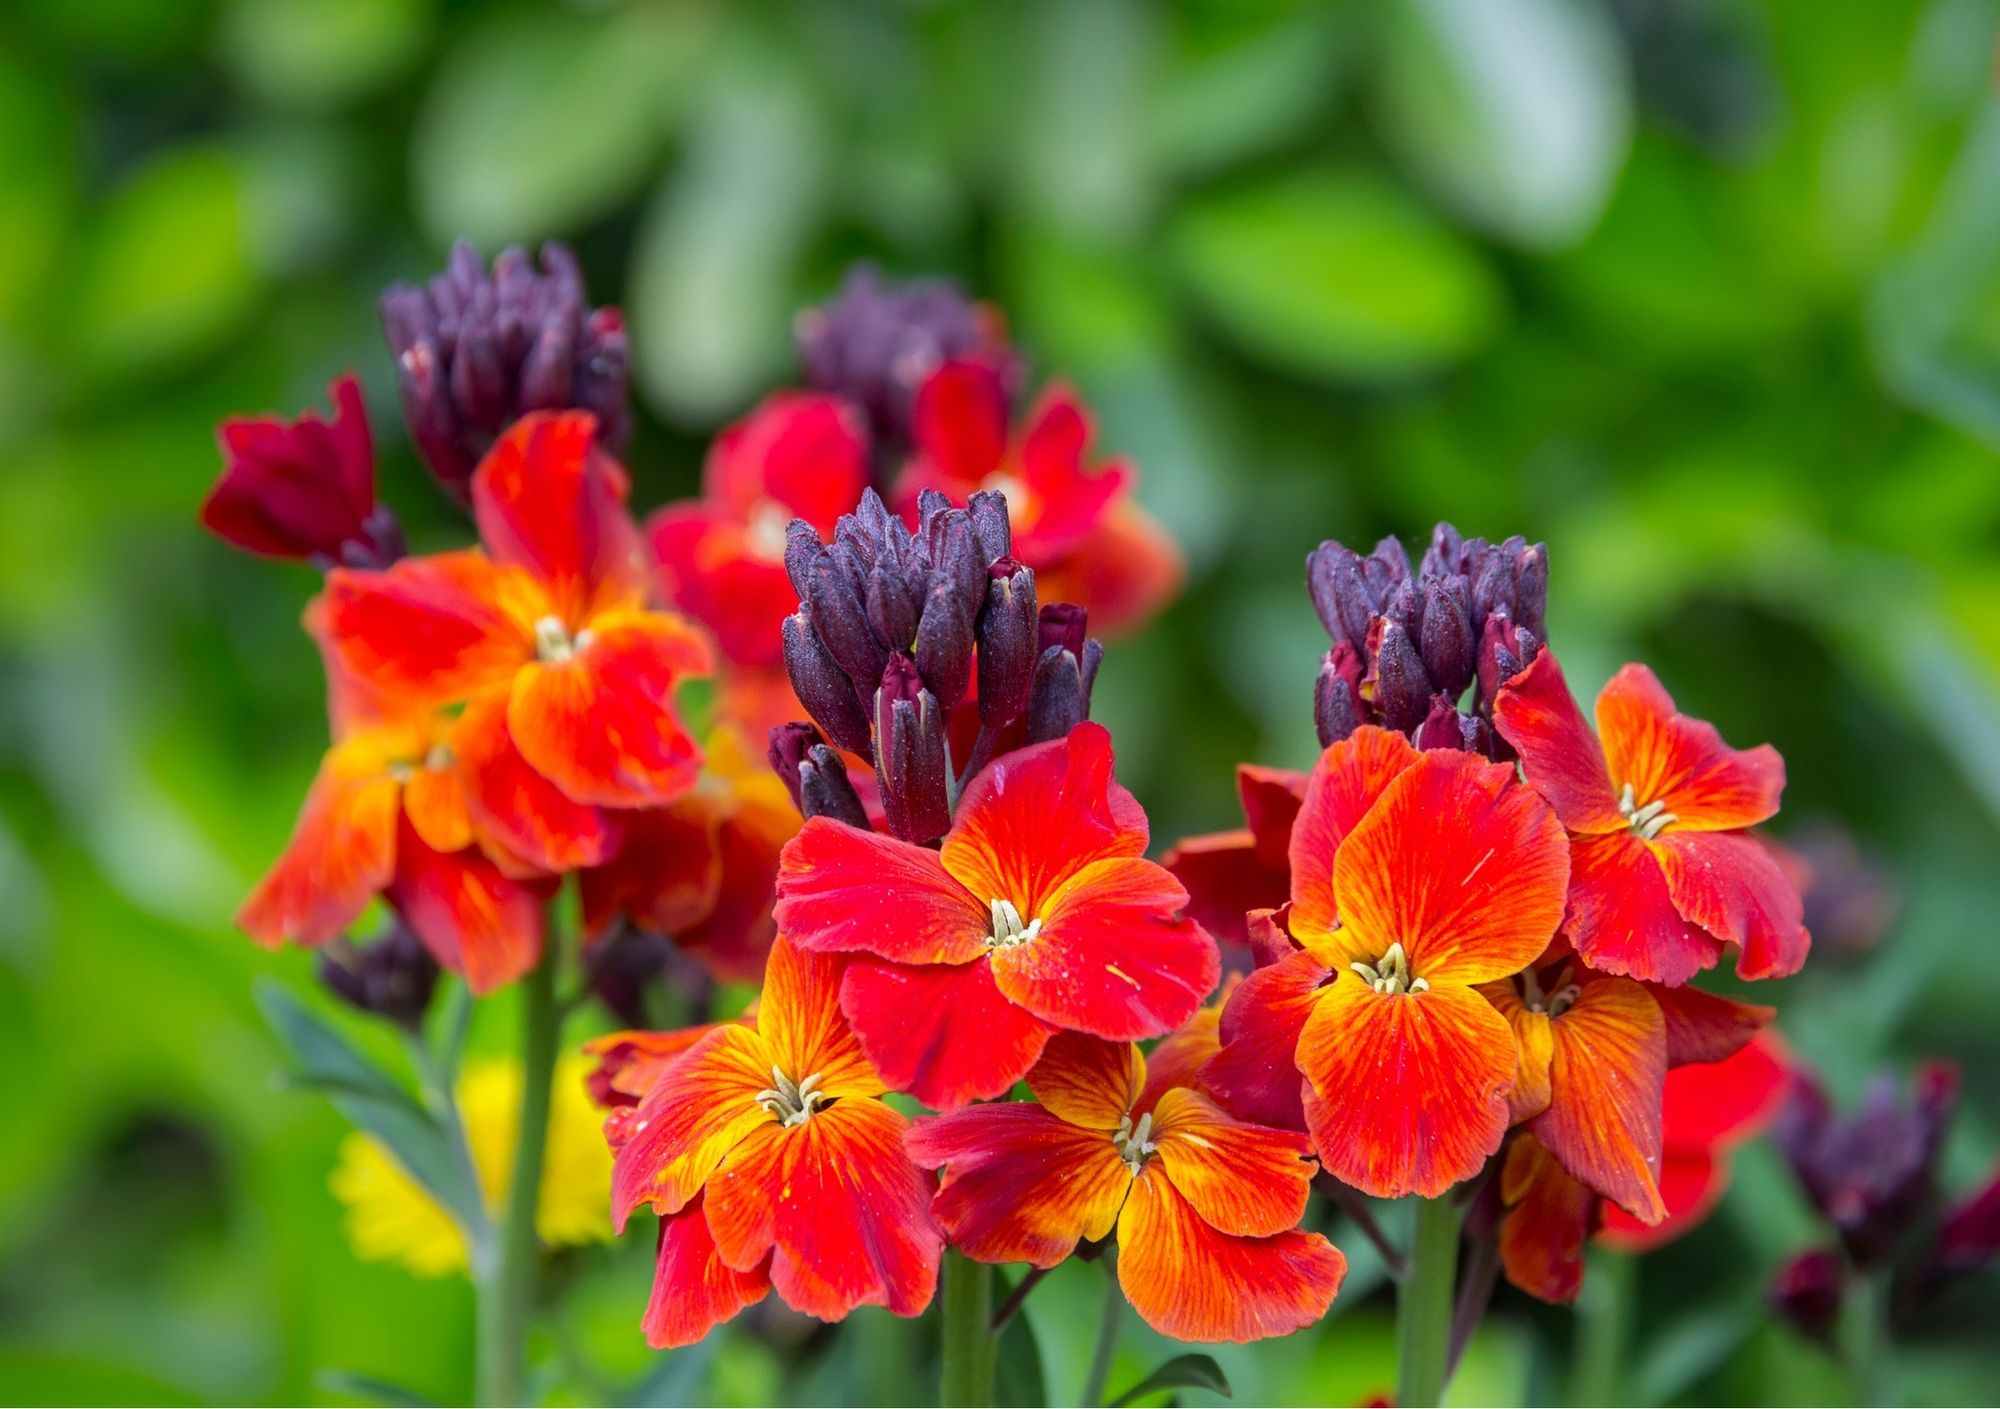 Bright colourful wallflowers